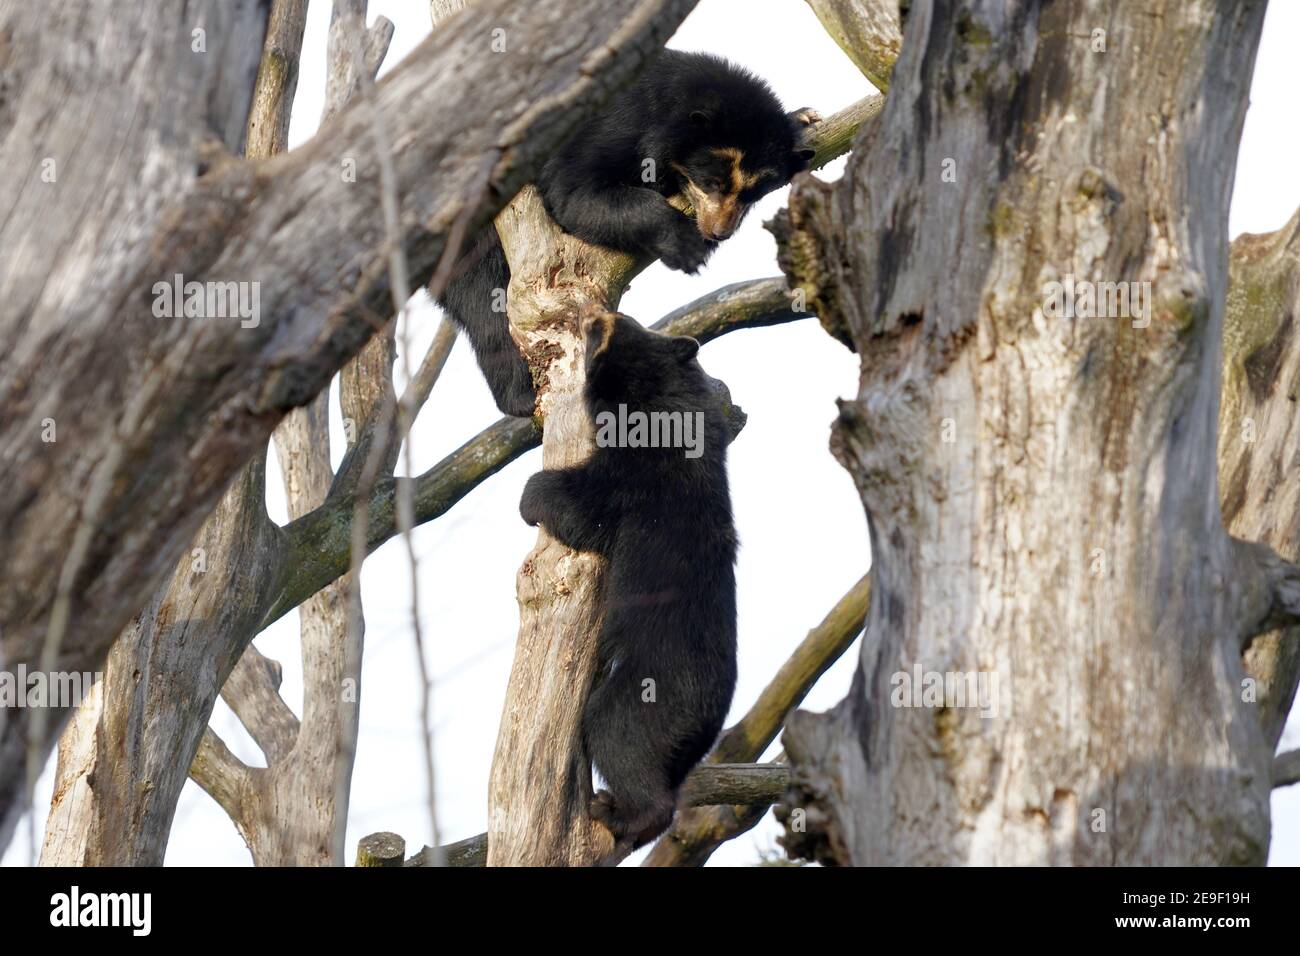 Two spectacled bears, in Latin called Tremarctos ornatus, playing together and climbing on tree branches. It is short faced bear from South America. Stock Photo